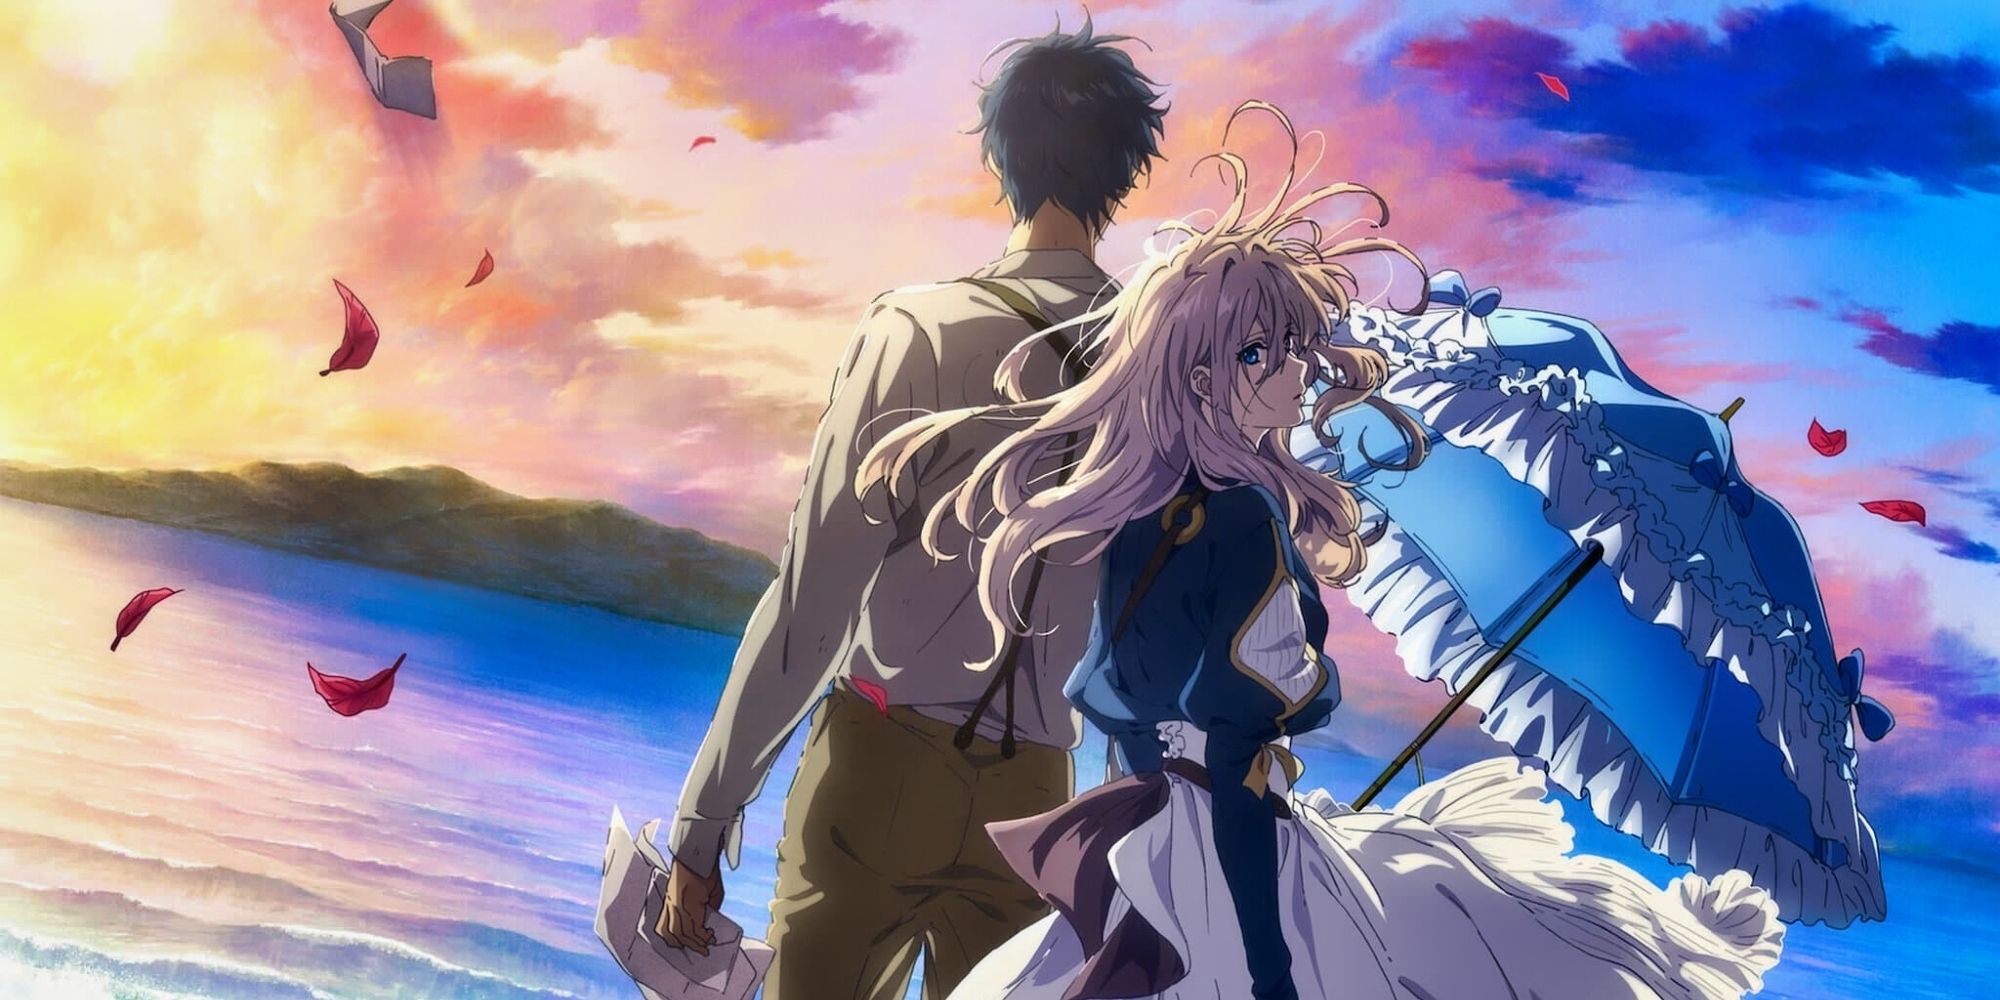 Violet Evergarden Season 2 production reportedly halted due to pandemic |  Entertainment